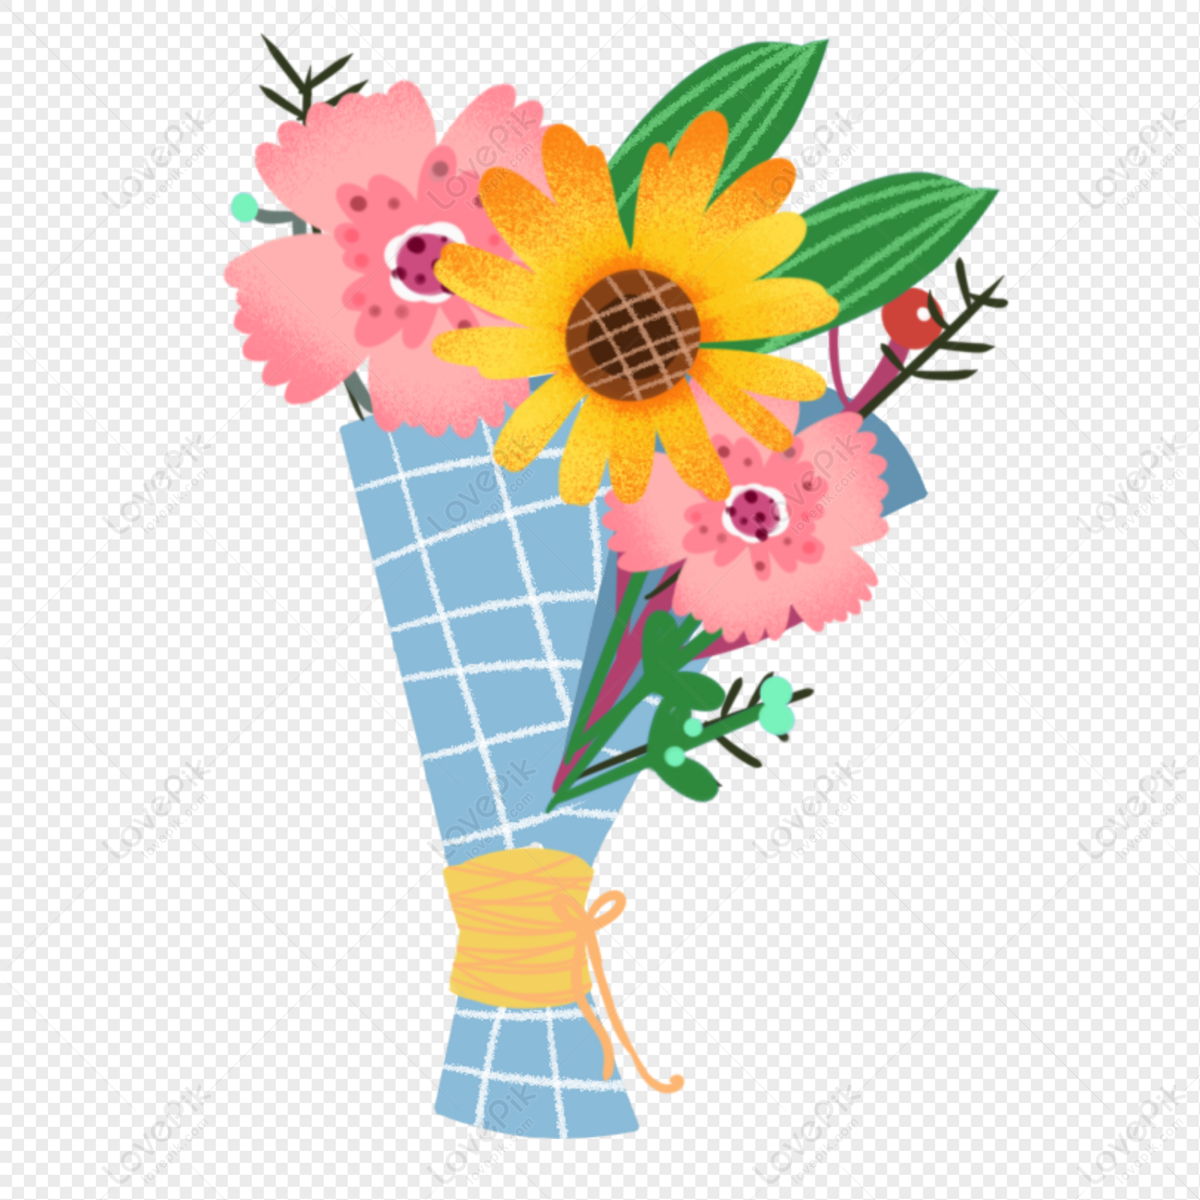 Flower Bouquet Cartoon Small Fresh Hand Painted PNG Image And Clipart Image  For Free Download - Lovepik | 401550028